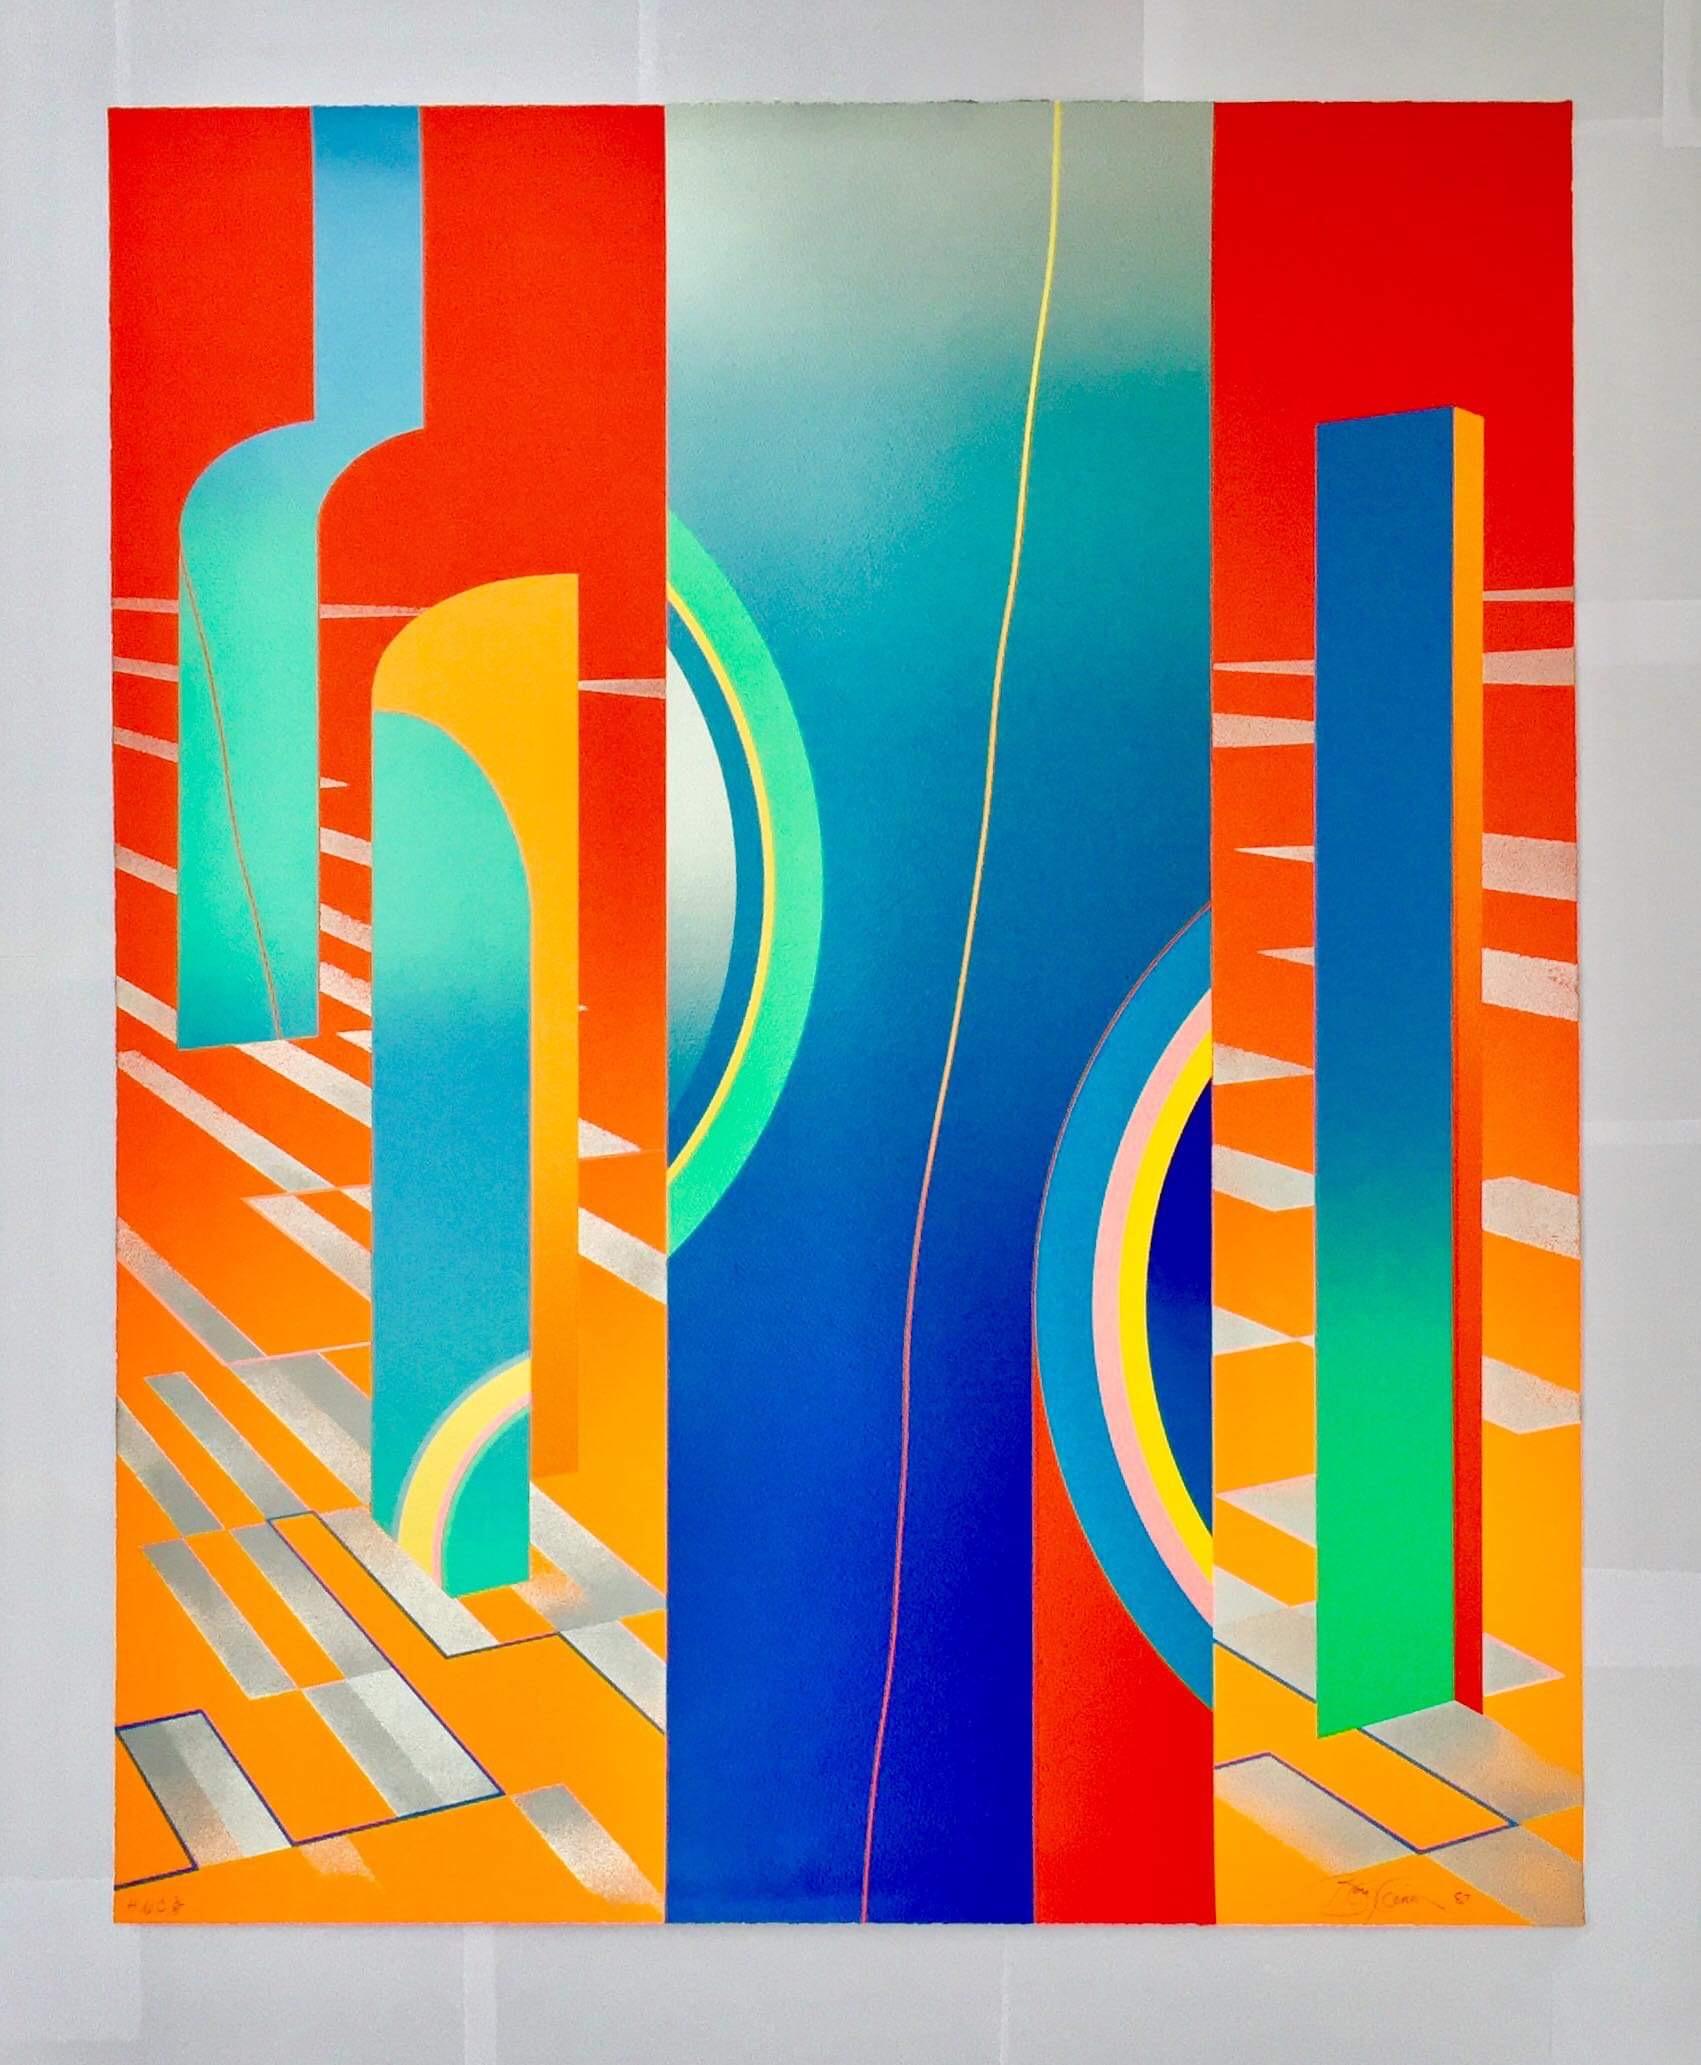 Collectors Limited Edition 1980's warm colourful abstract geometric graphic 1 - Print by Anthony Benjamin